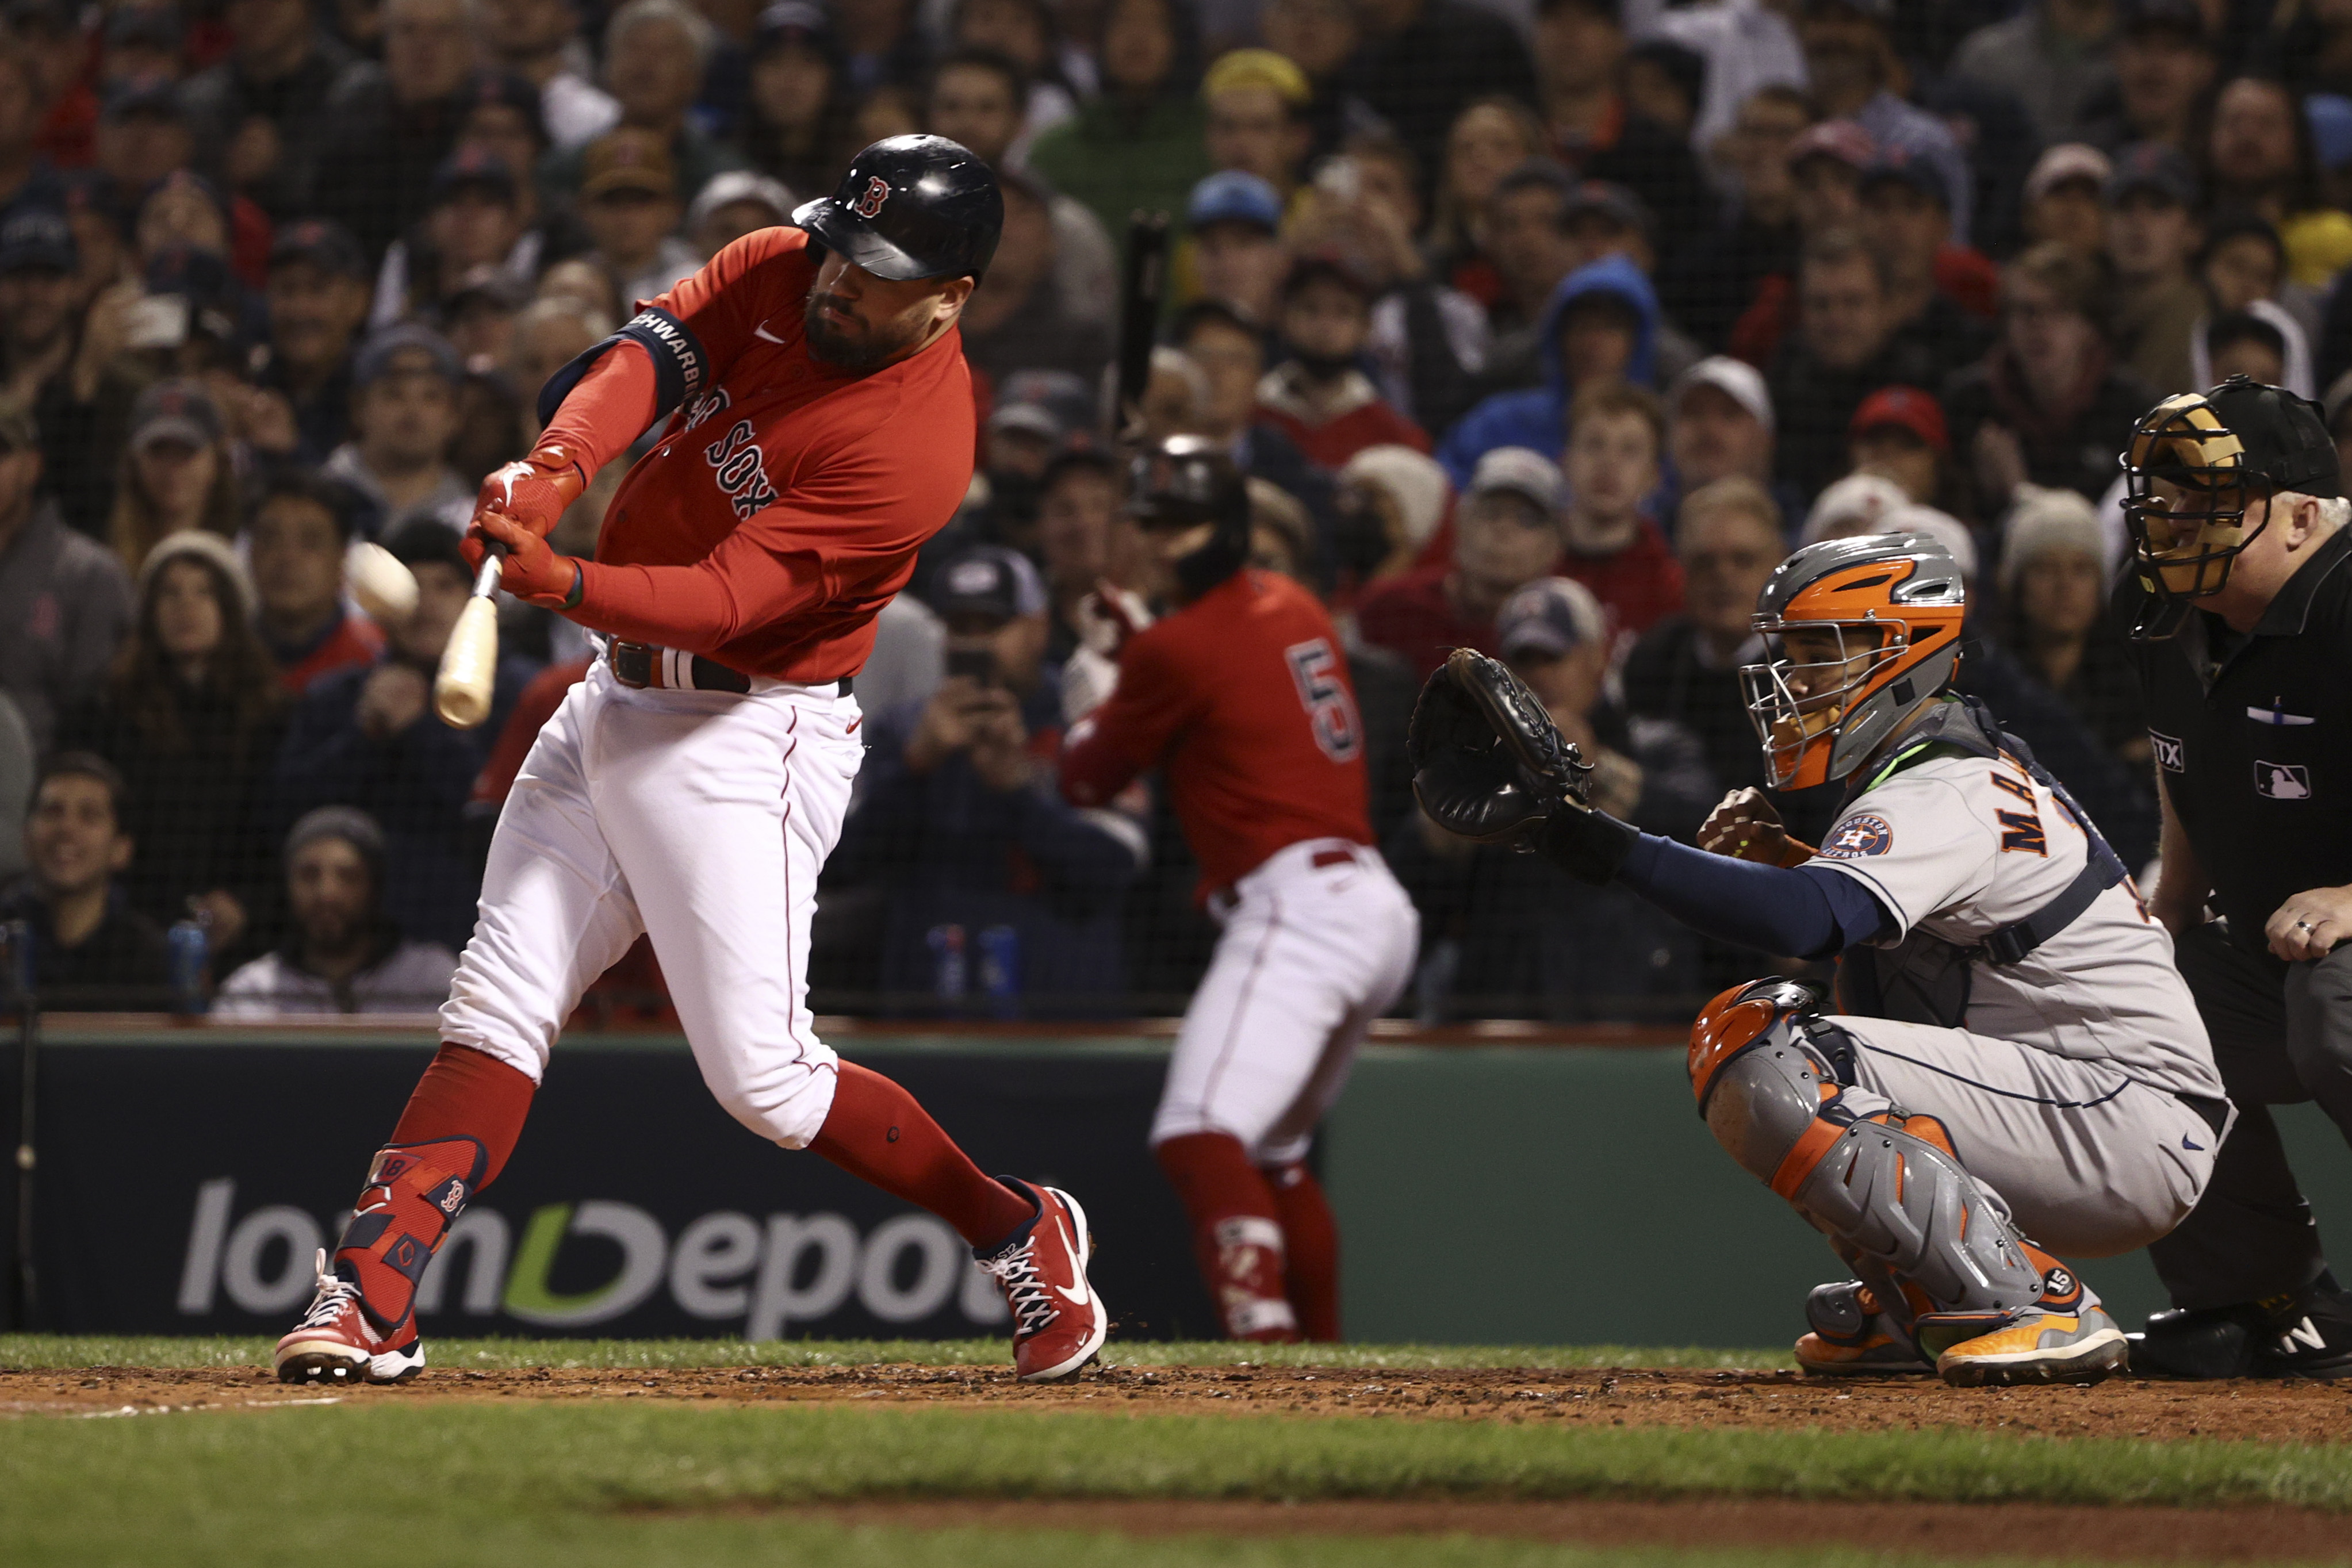 Kyle Schwarbers grand slam helps Boston Red Sox beat Houston Astros, take 2-1 ALCS lead